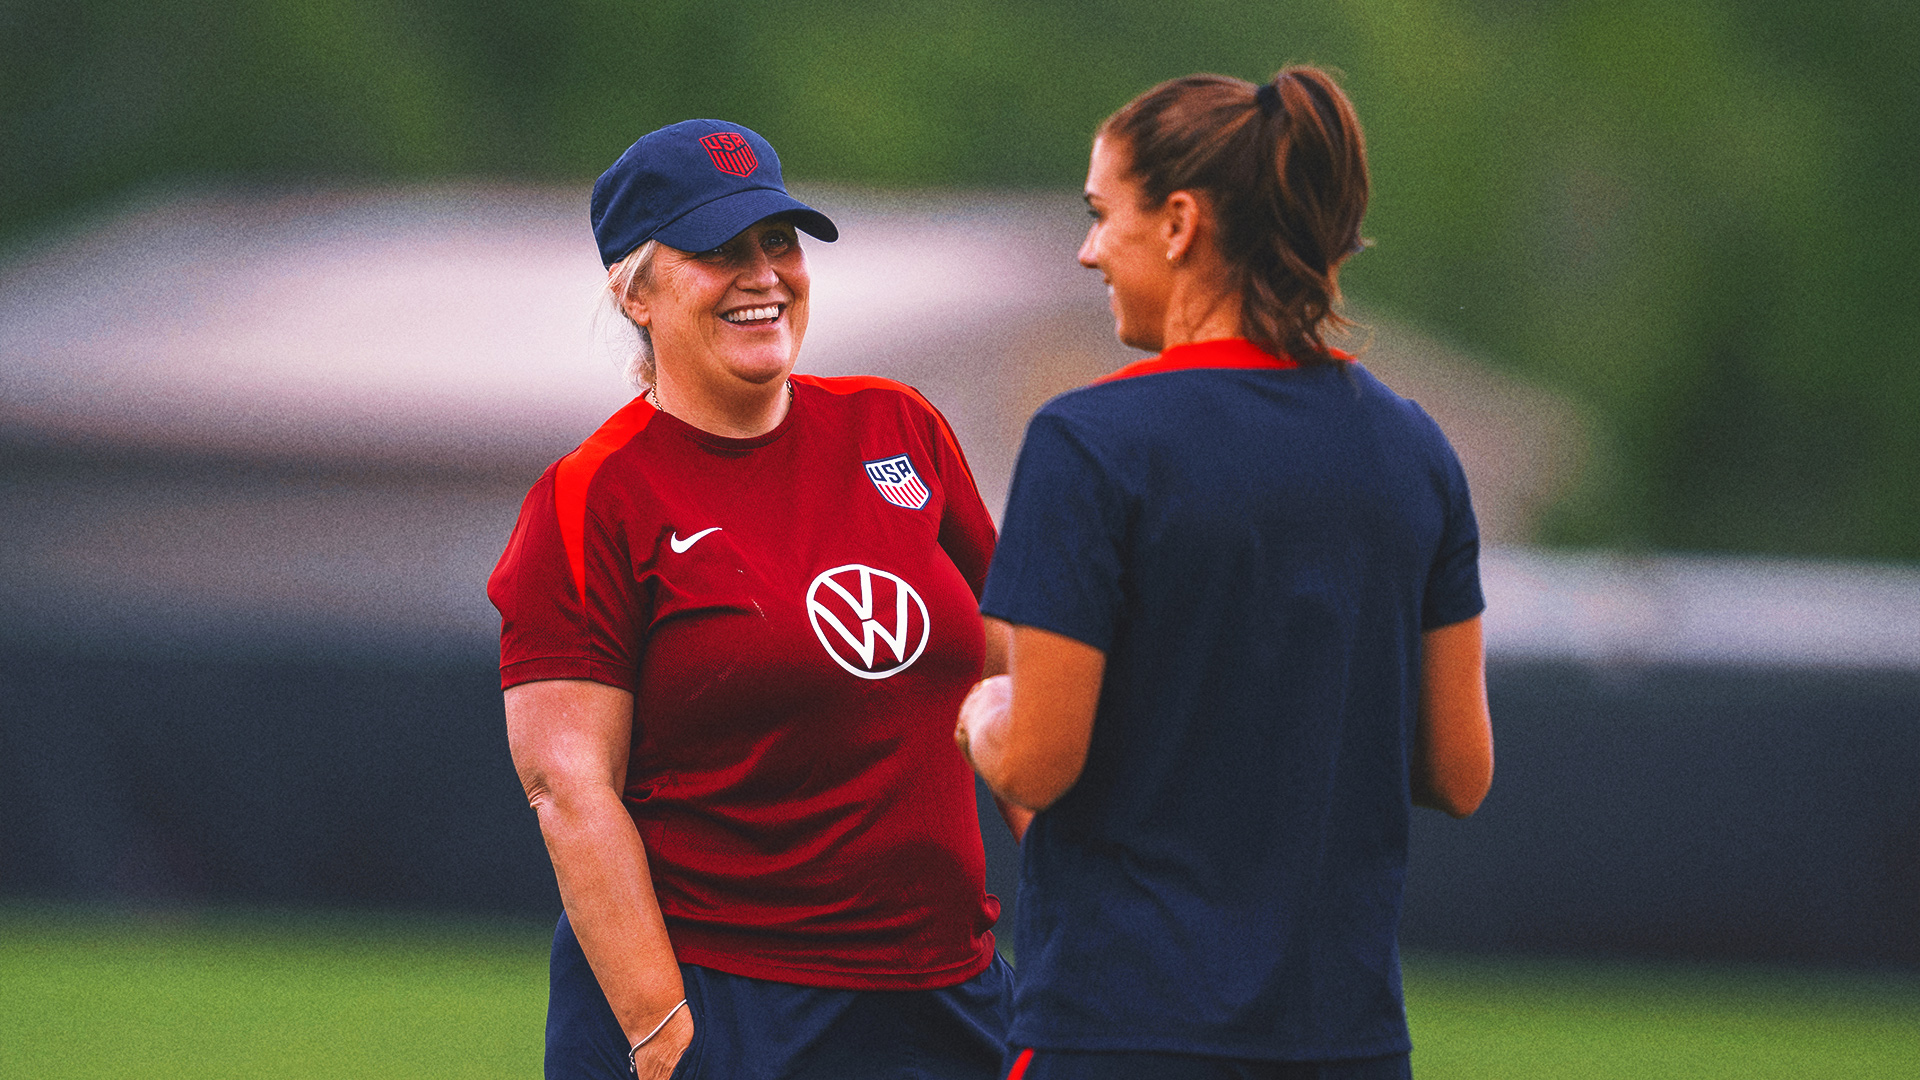 Emma Hayes making strong first impression at USWNT camp: ‘She’s a coach you want to play for’